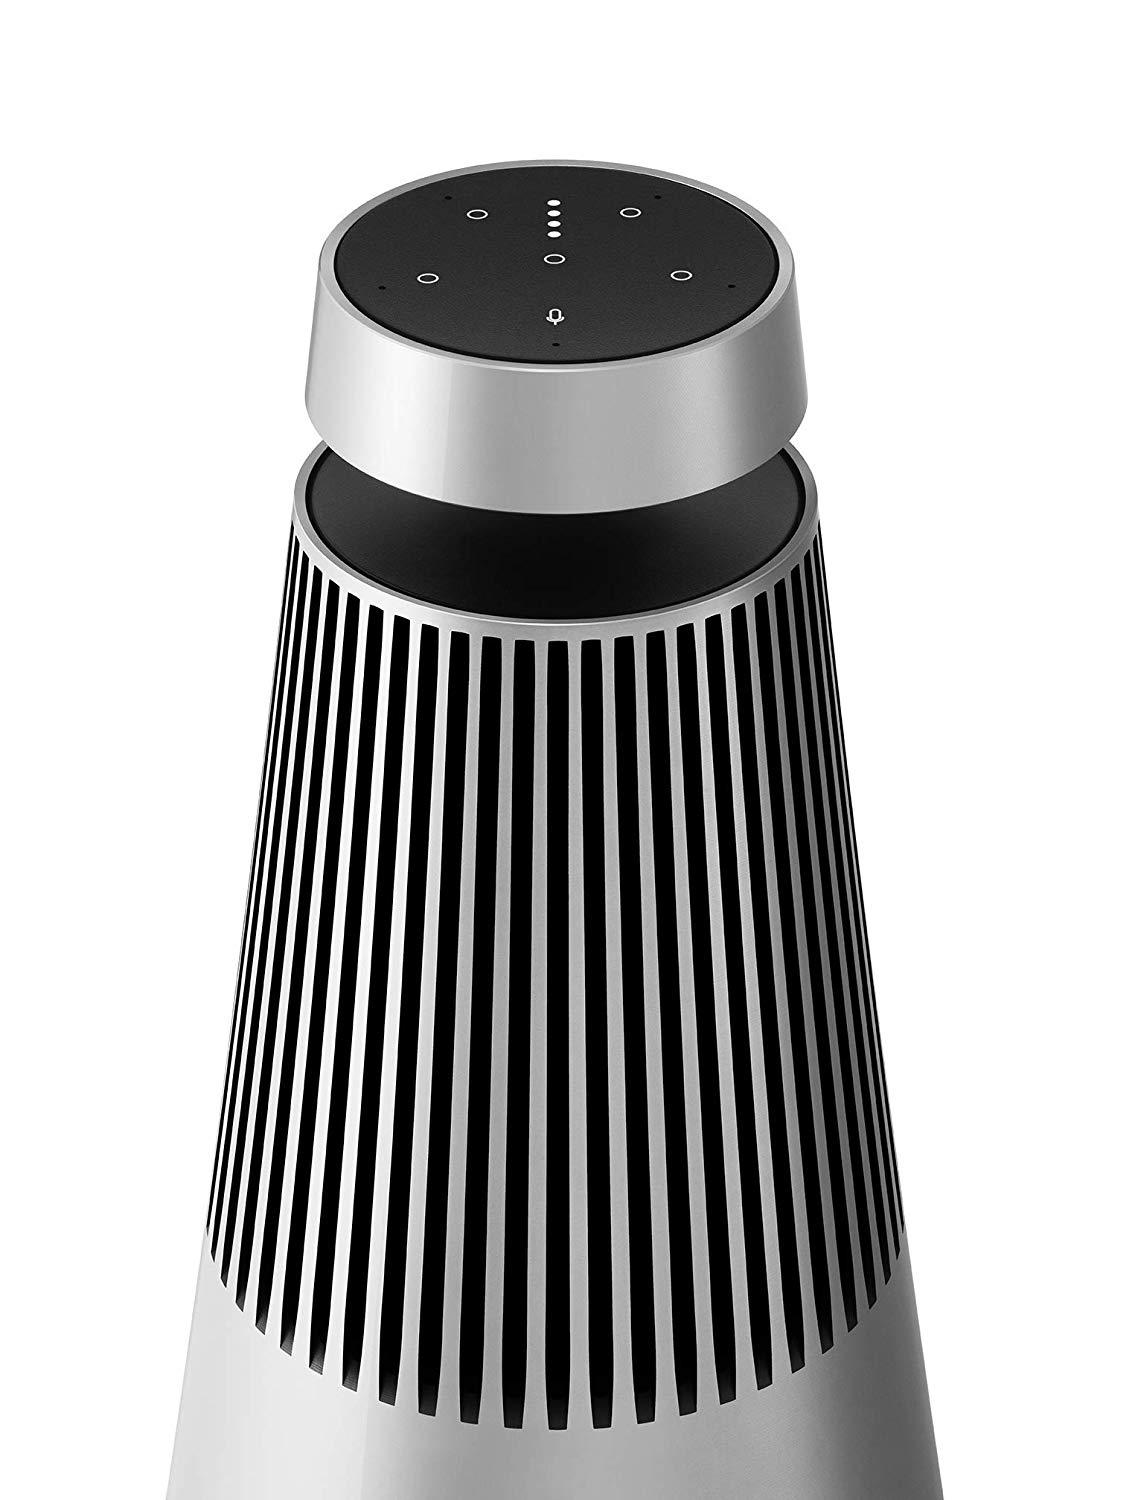 Bang & Olufsen Beosound 2 Speaker with Google Voice Assistance